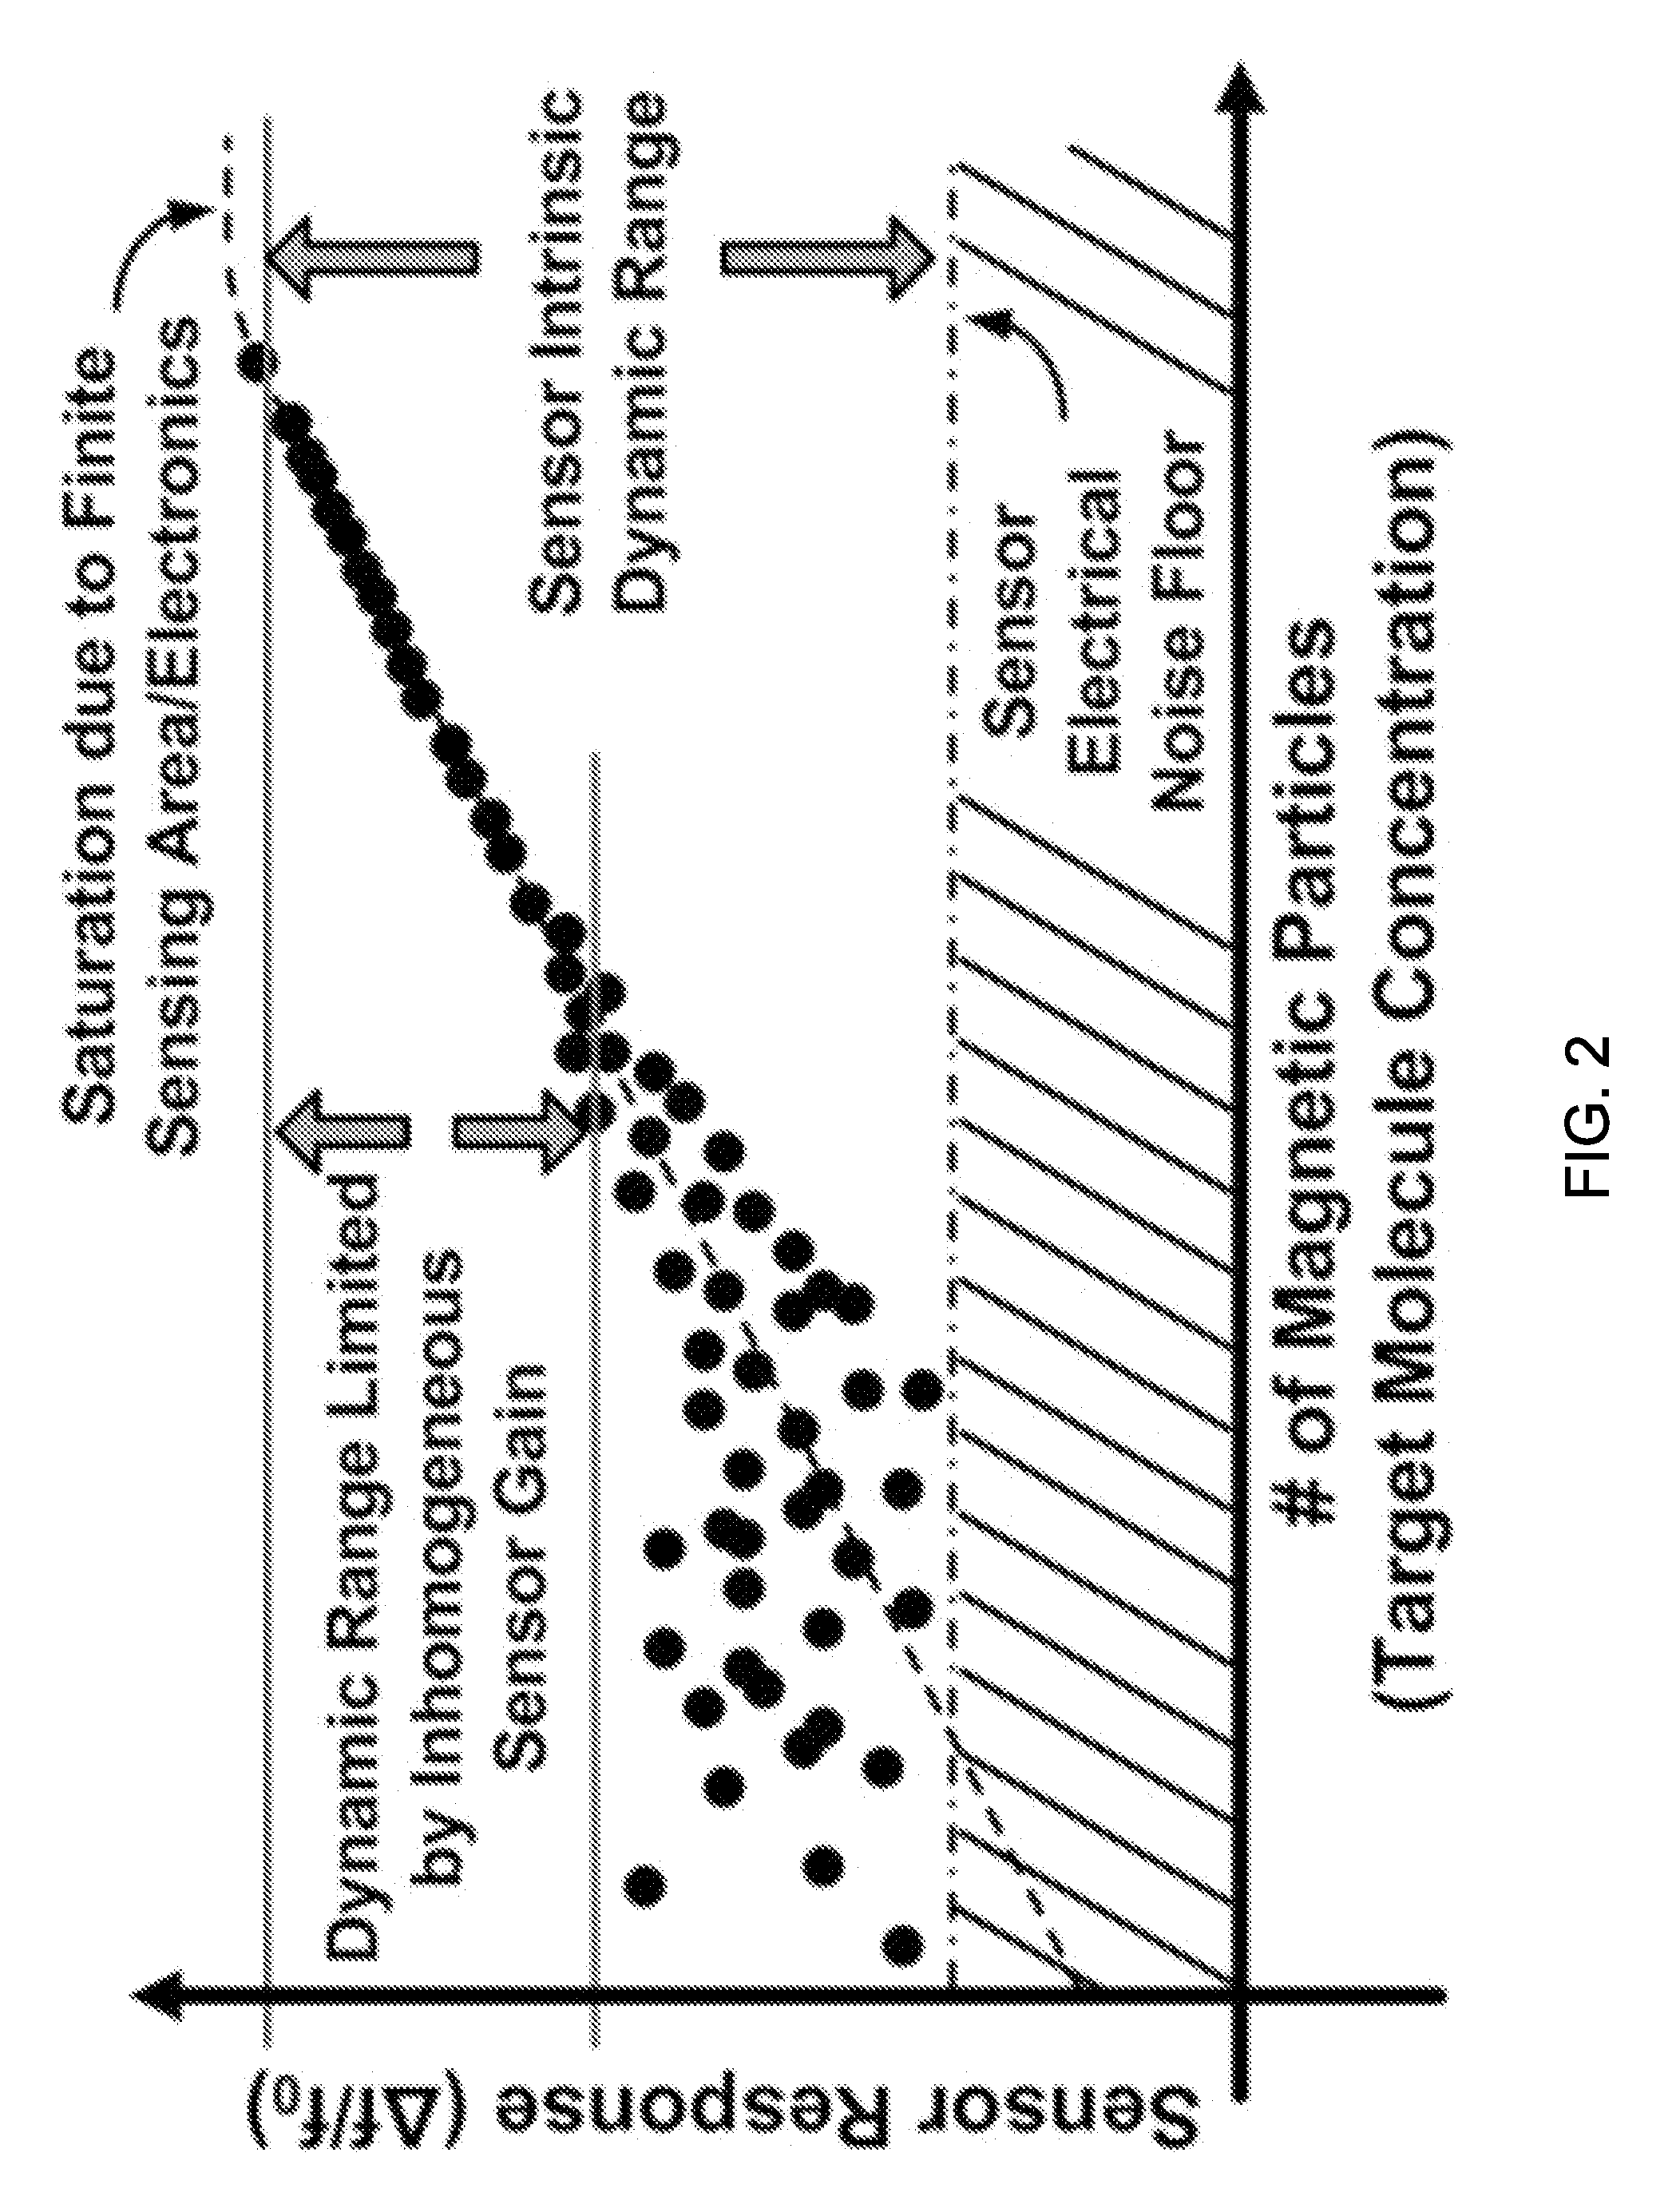 Inductors with uniform magnetic field strength in the near-field